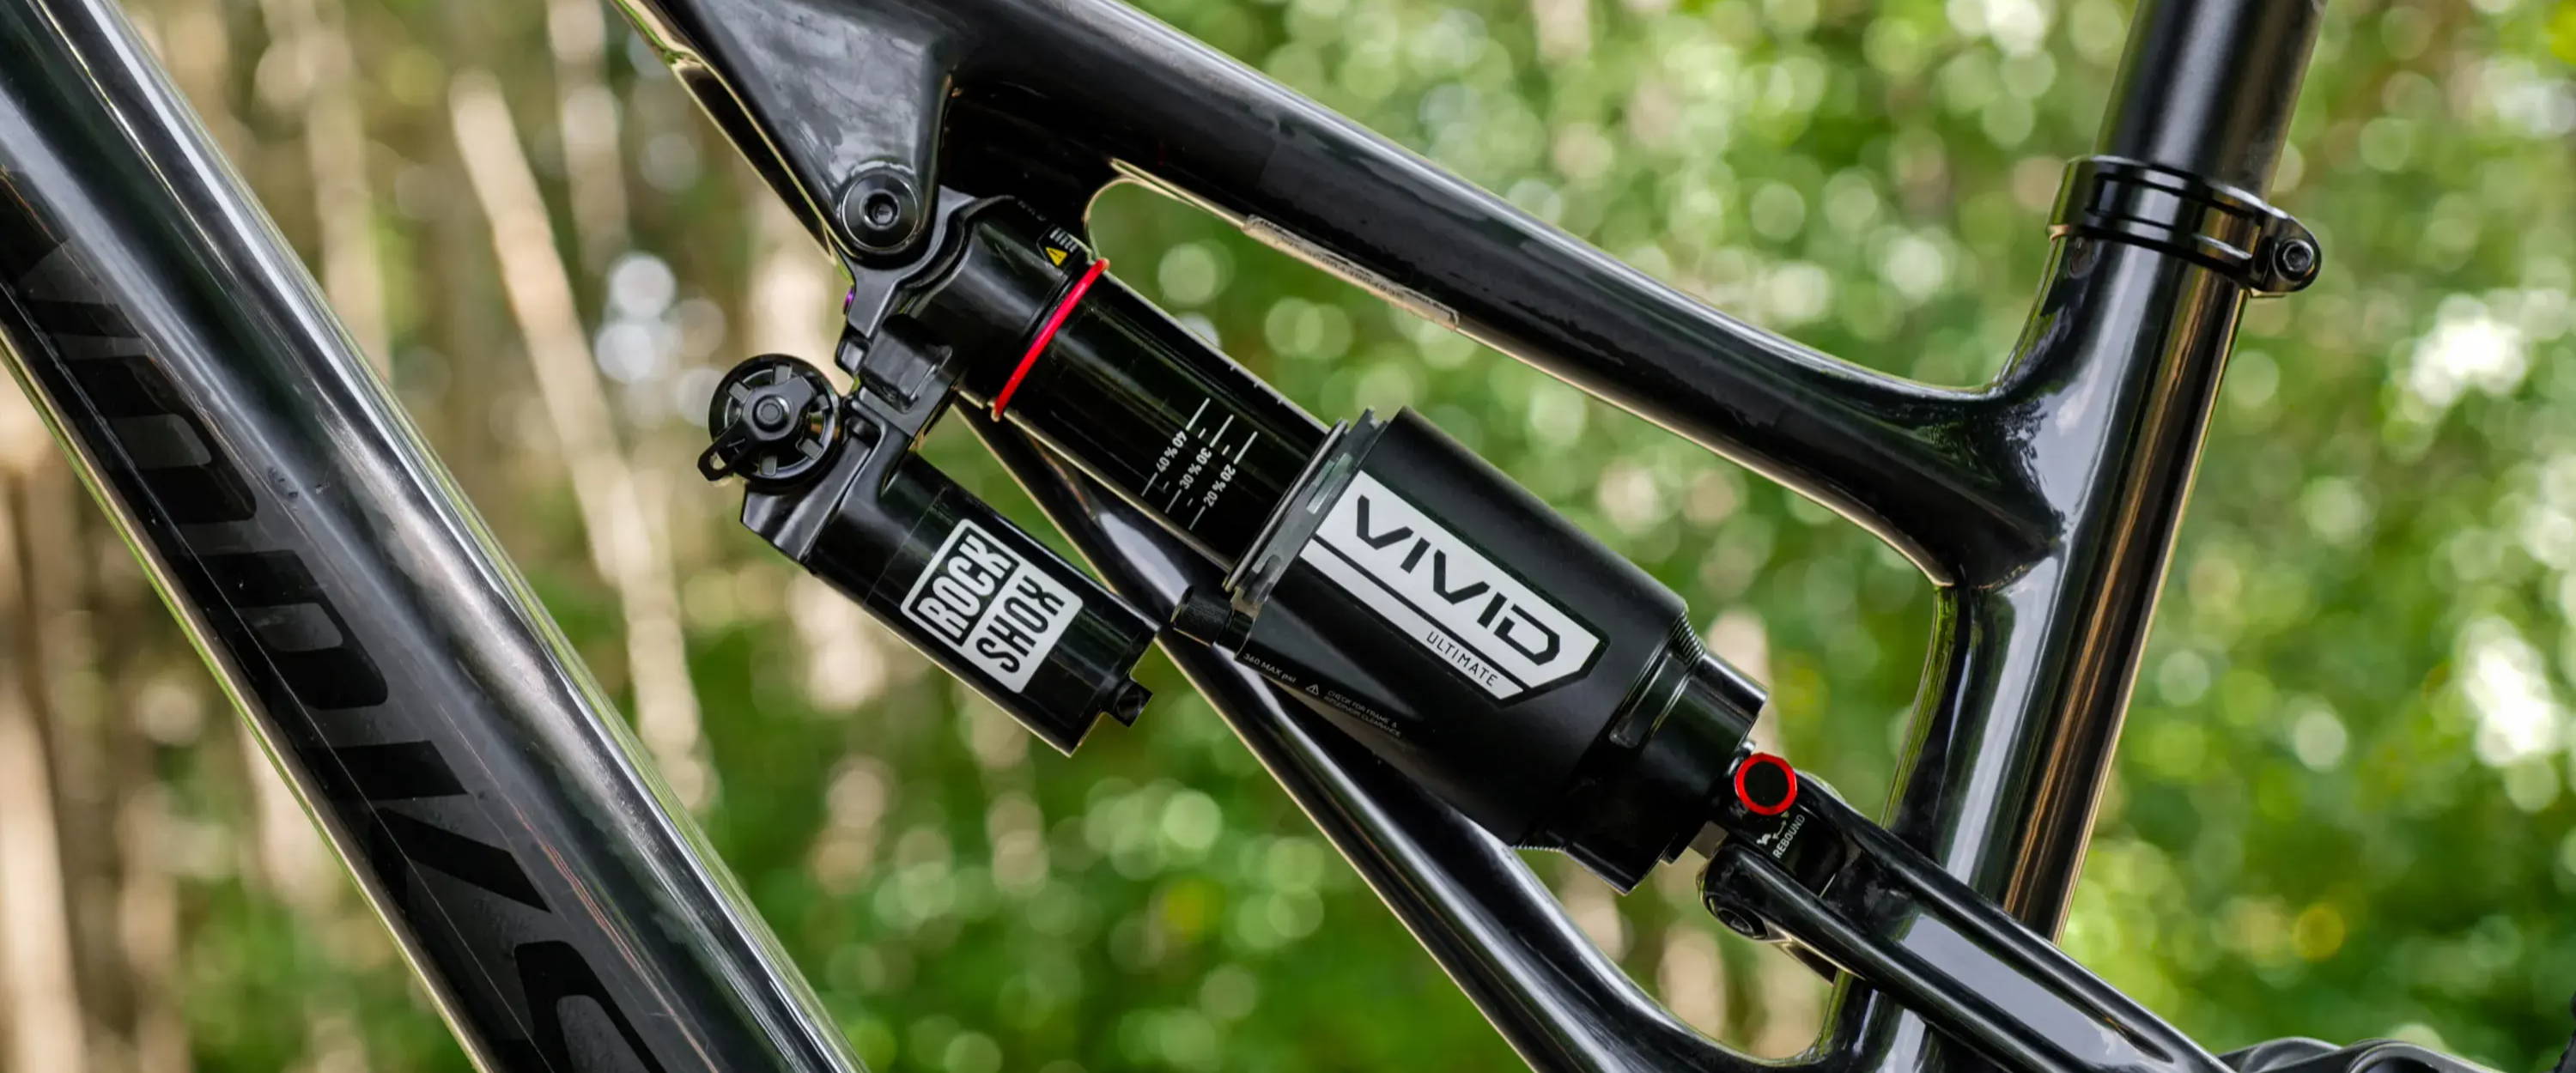 rockshox vivid ultimate rear shock on a specialized stumpjumper mountain bike for the vivid overview and first looks